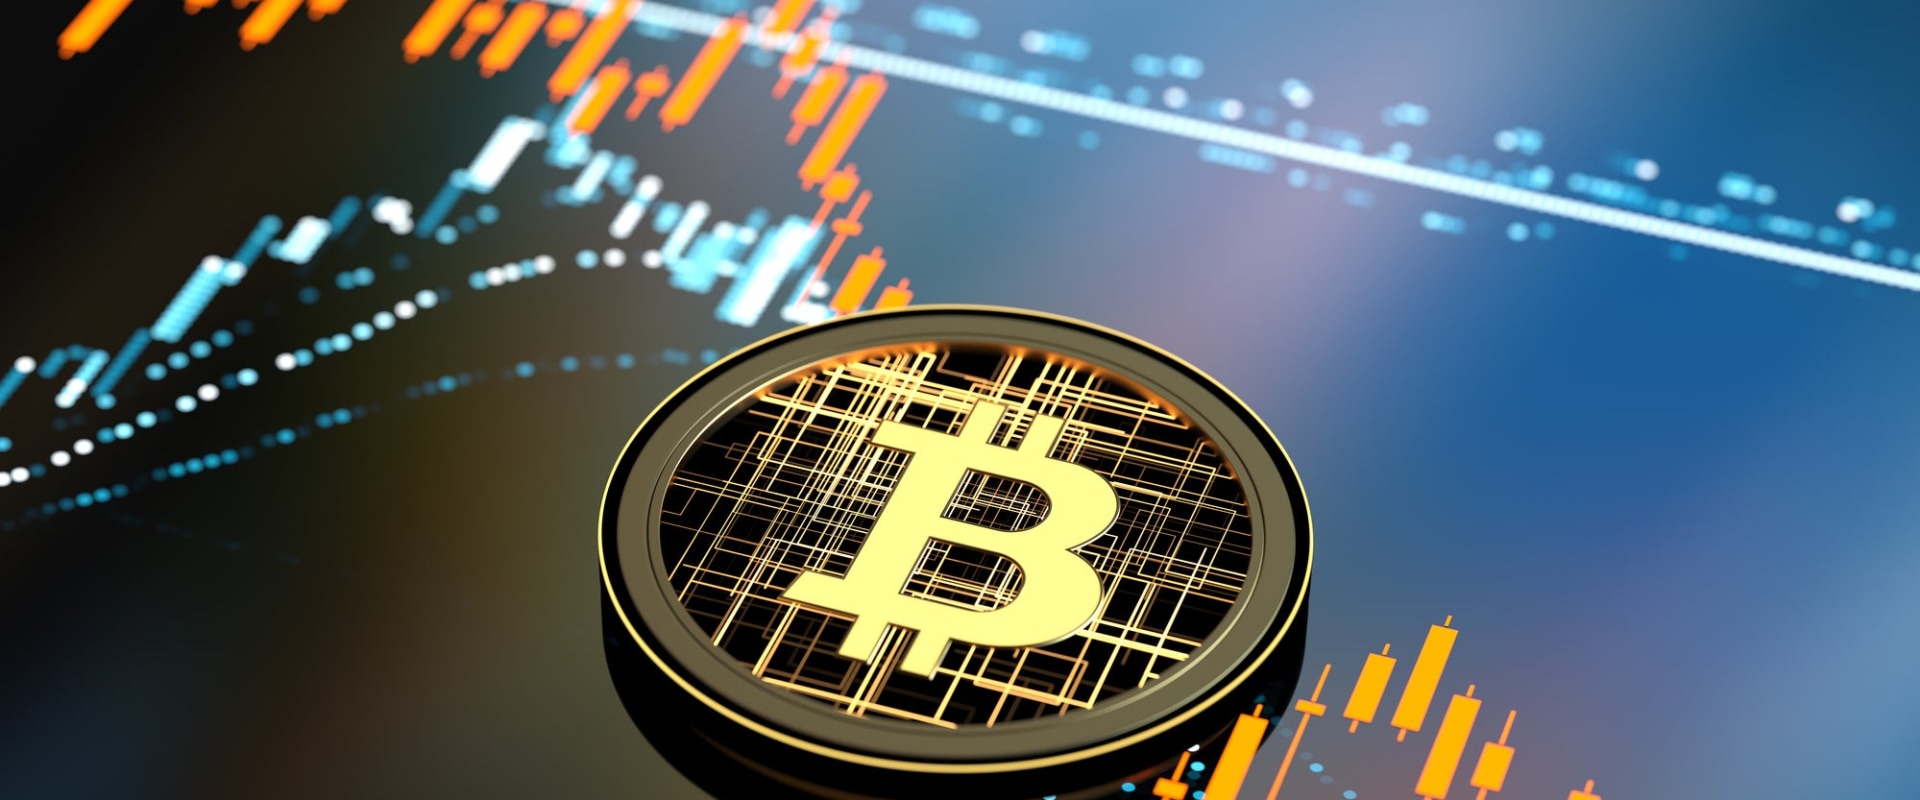 Are cryptocurrencies a good investment right now?